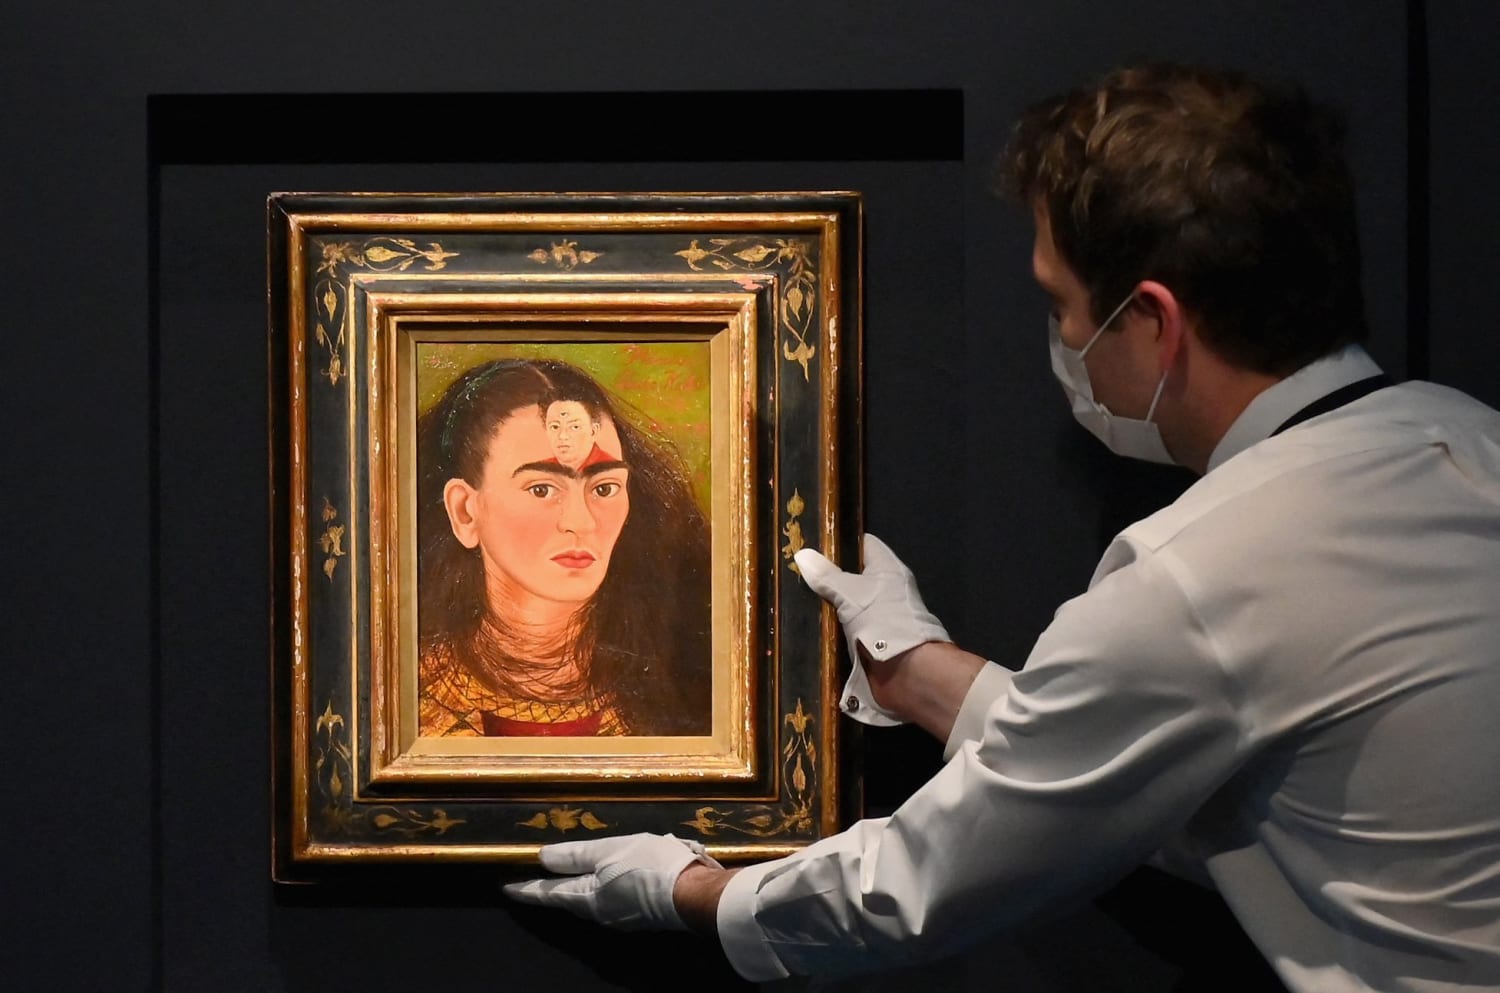 One of Frida Kahlo’s last portraits sells for a record $34.9 million at auction